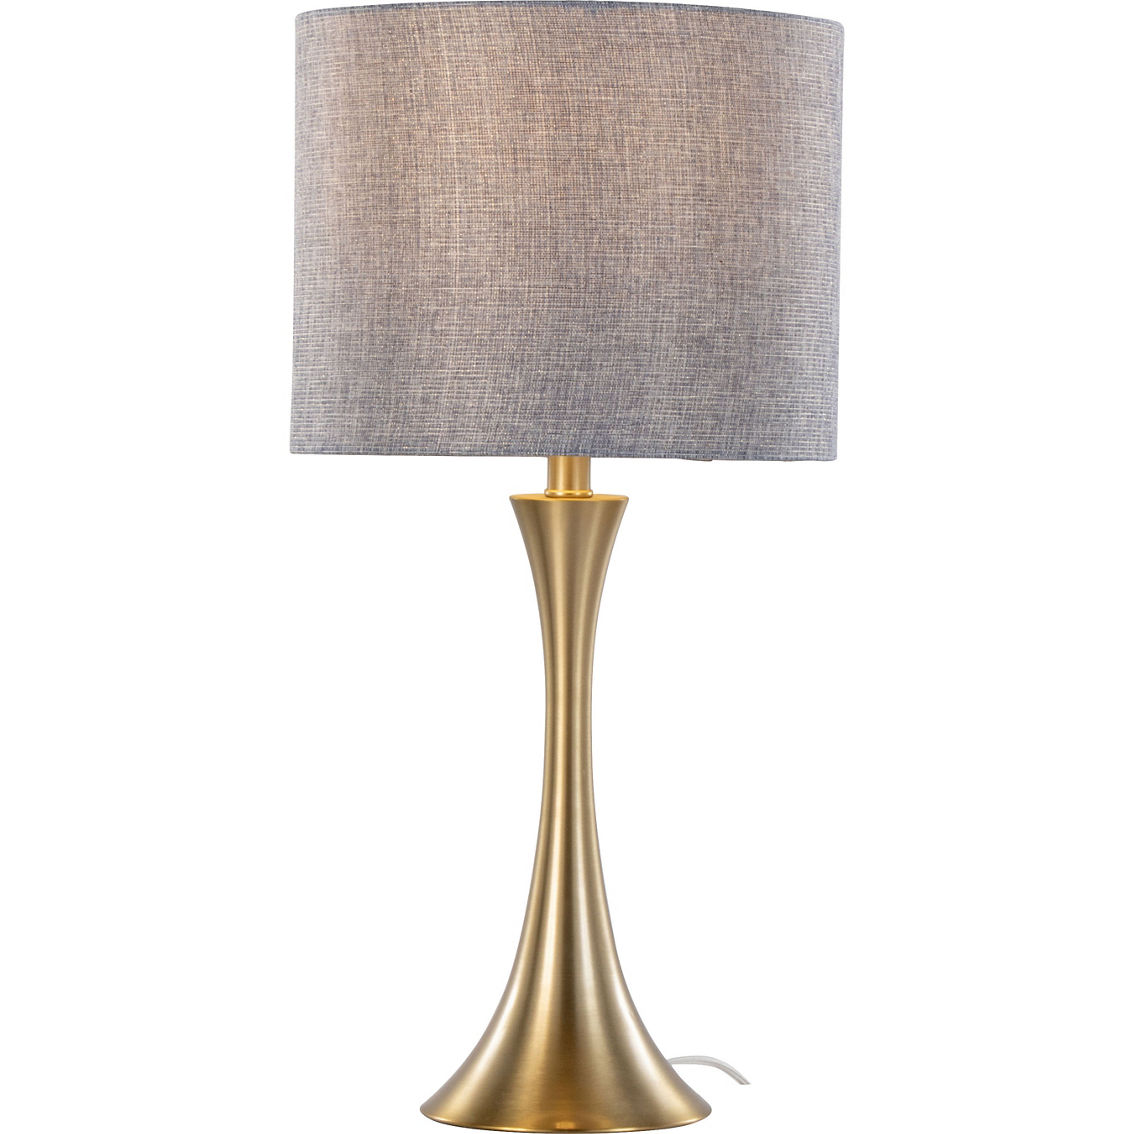 LumiSource Lenuxe 24.25 in. Metal Table Lamps 2 pk. - Image 3 of 9